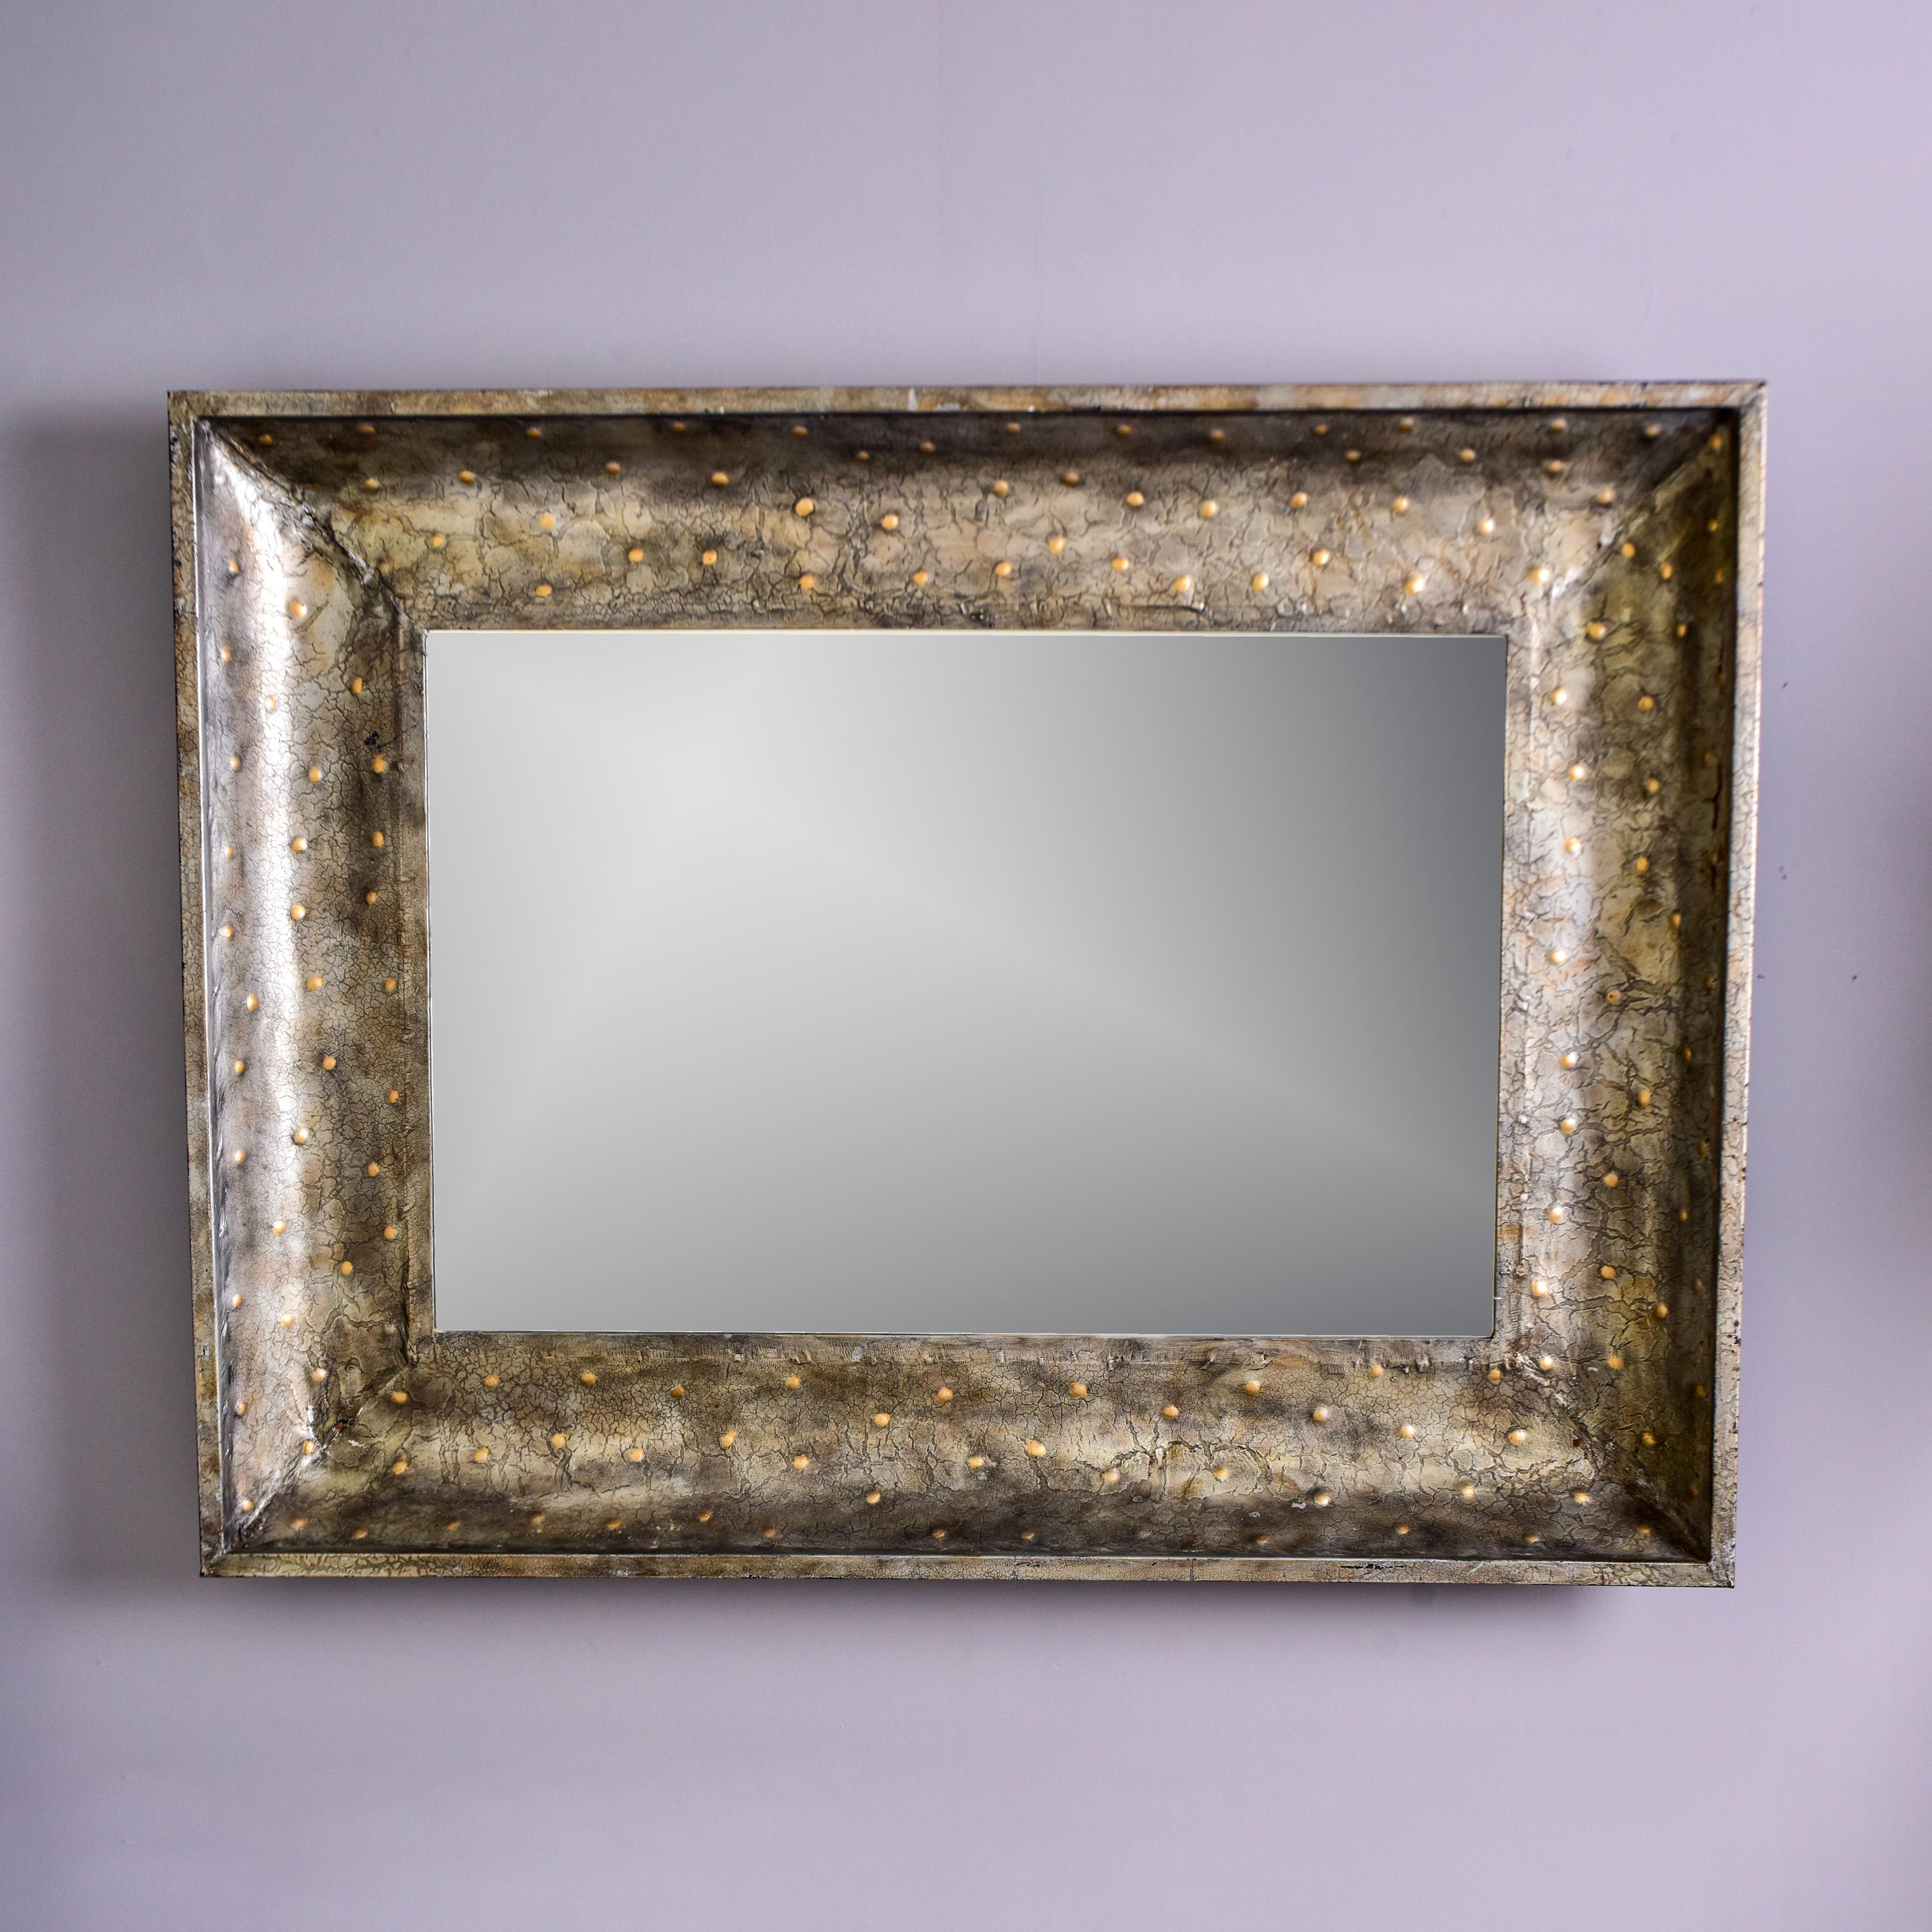 This large metal framed mirror can be hung vertically or horizontally and the longest side is just over five feet. The wide frame has a rustic, worn steel color finish with raised brass colored dots. Unknown maker. Found in the US.